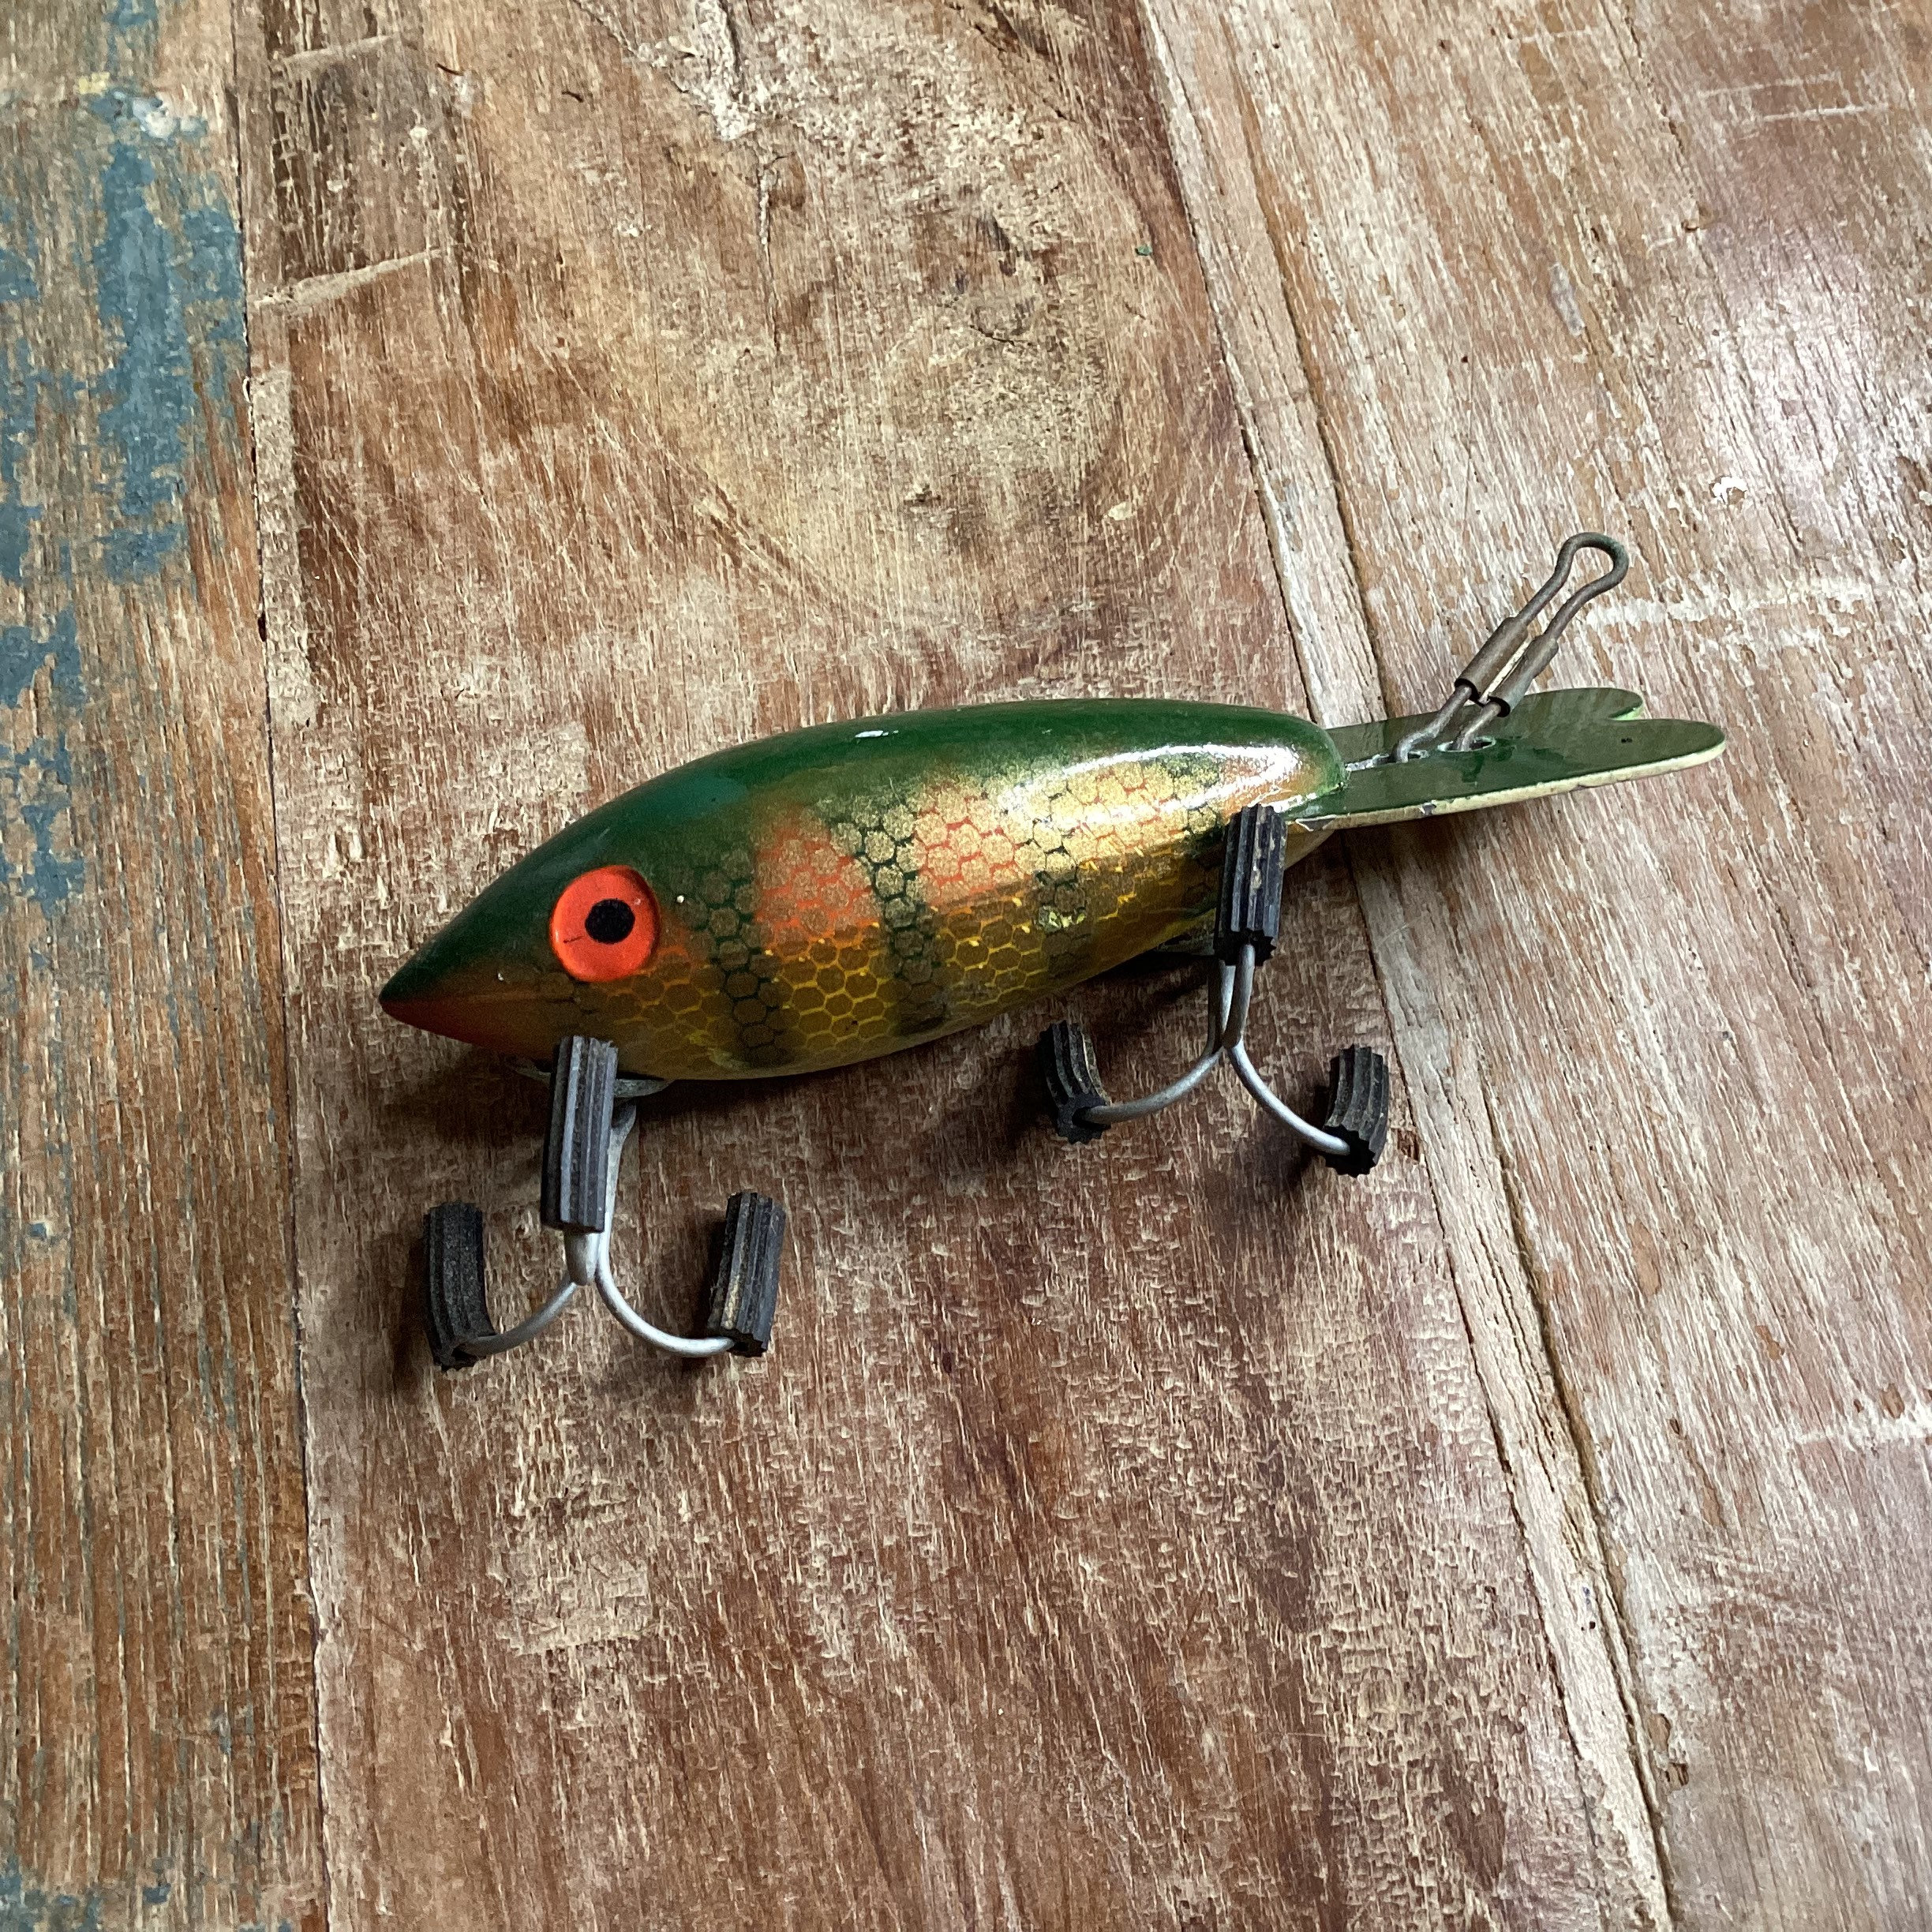 Vintage wooden fishing lure ~ hand painted green orange gold scale fish ~  LUXON Bomber Bait Company outdoor recreation collectible